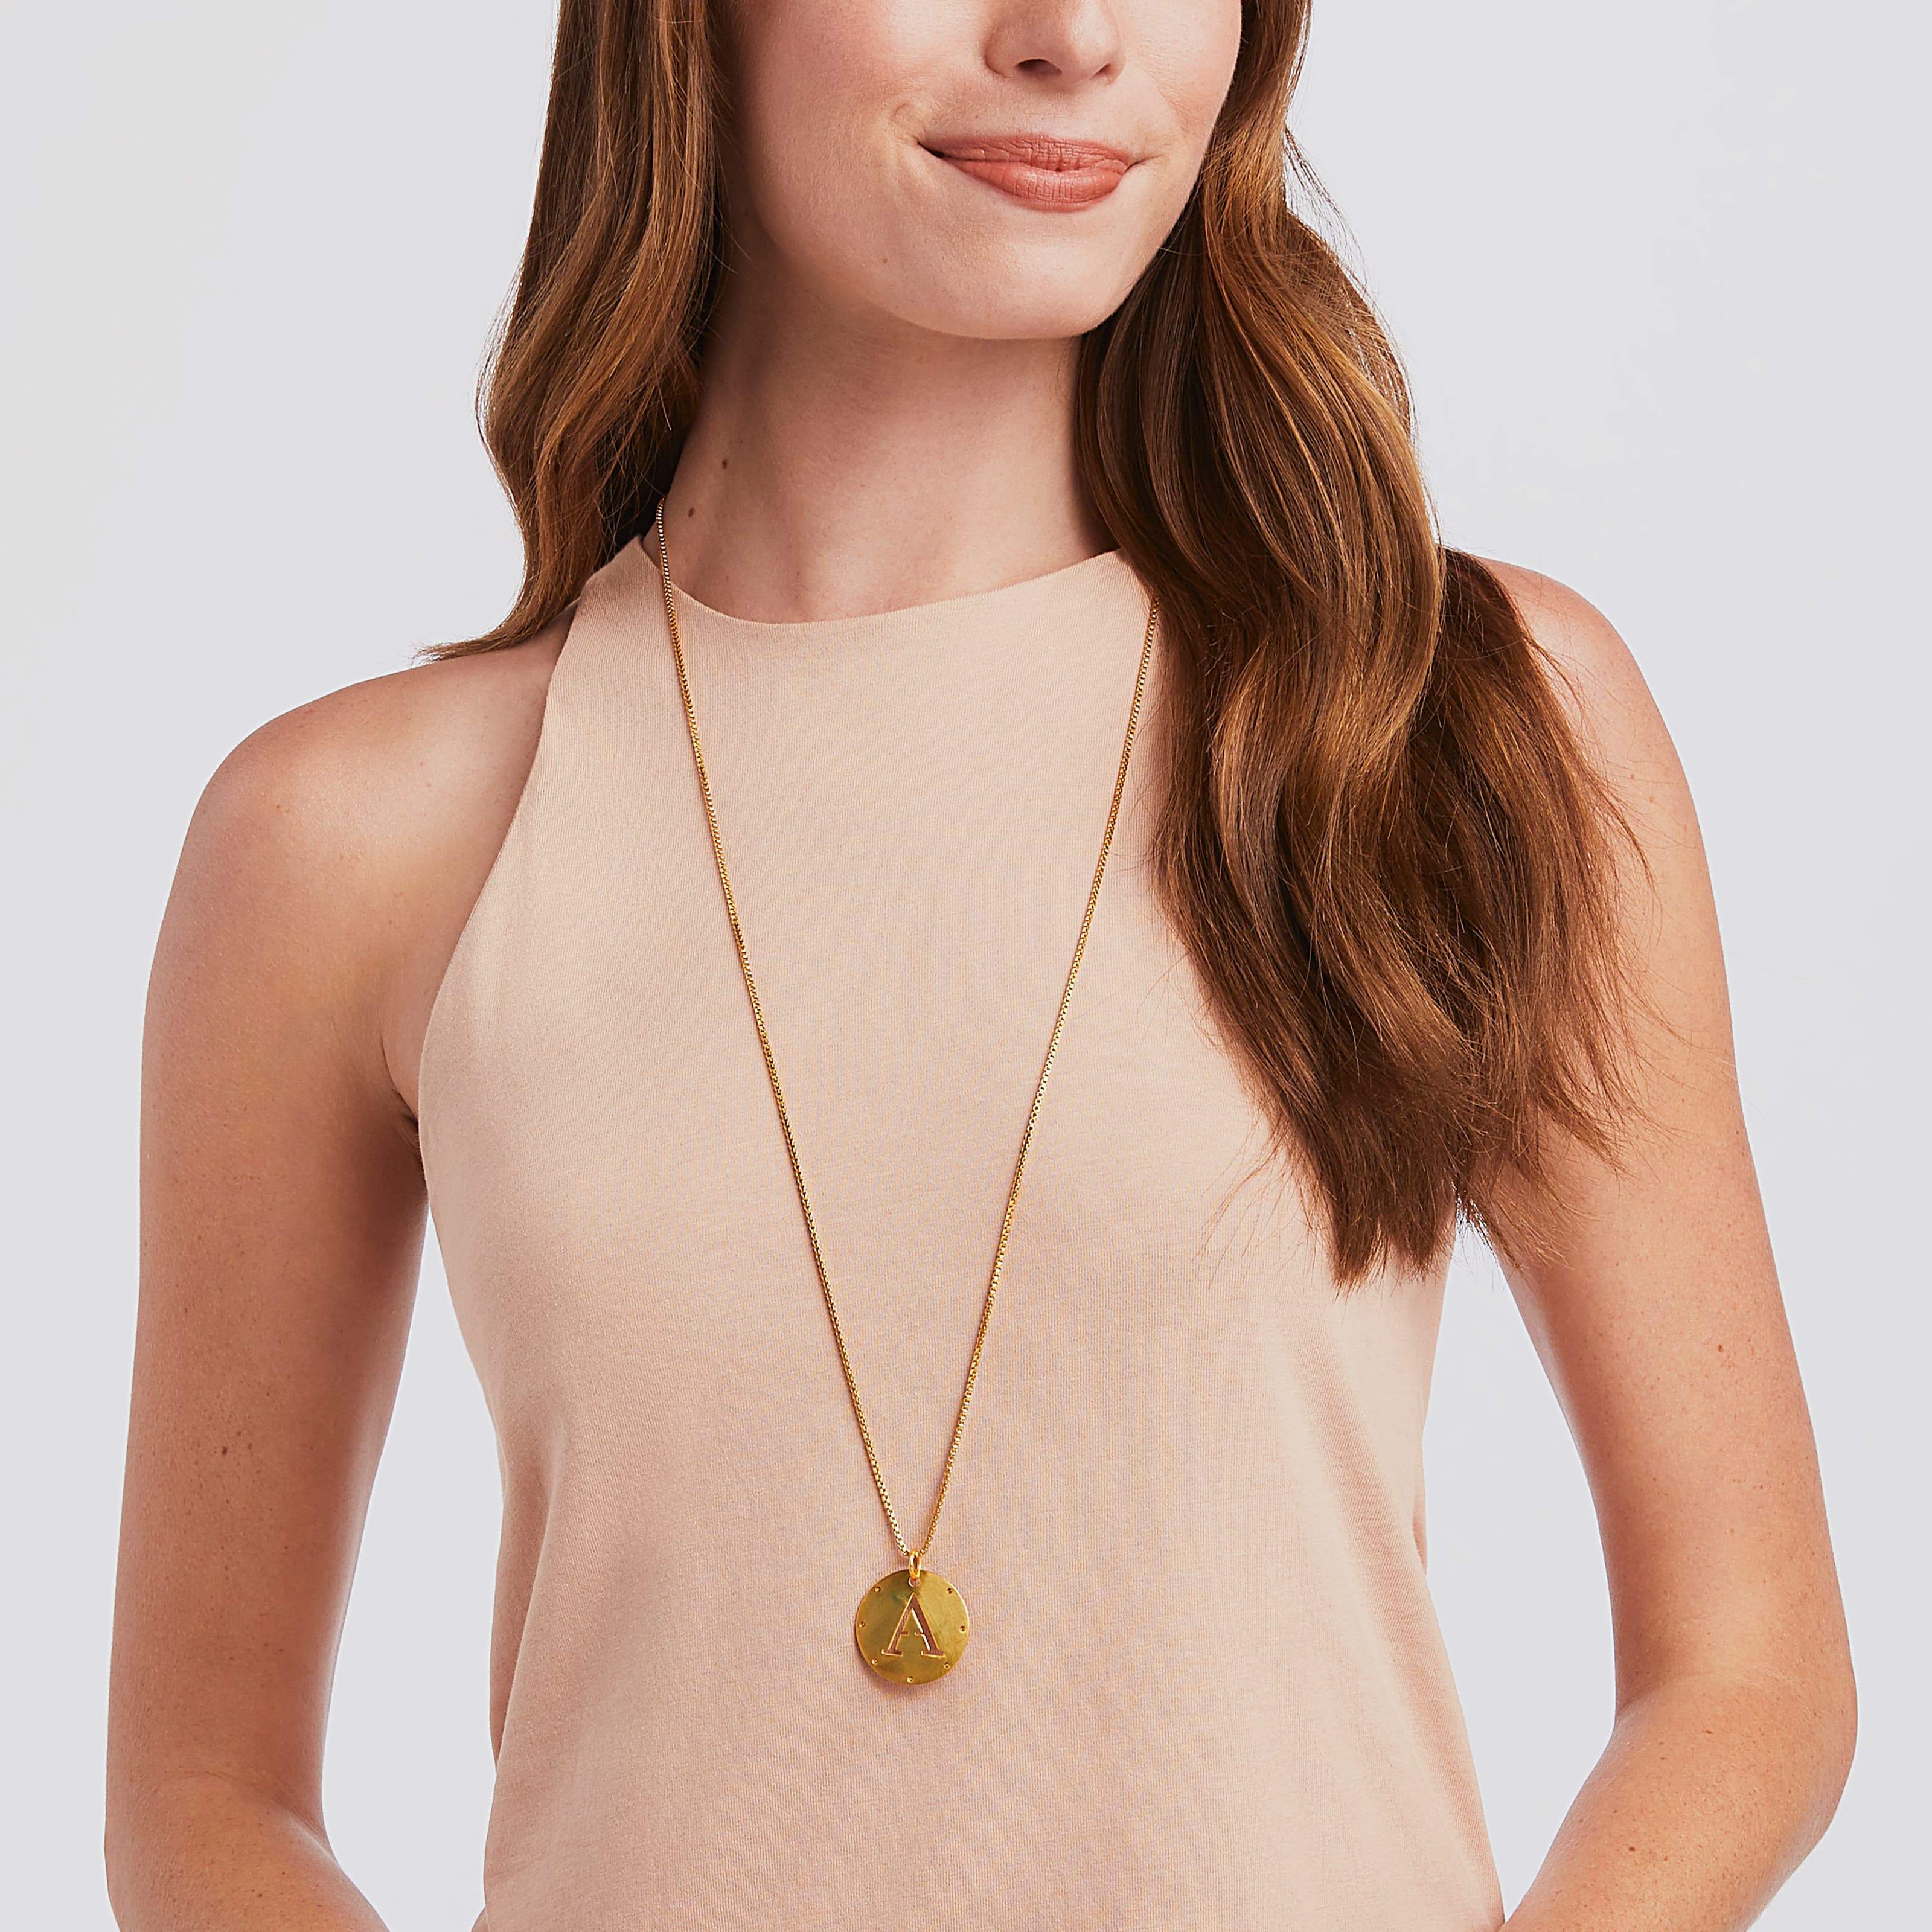 Long Gold Charm Necklace